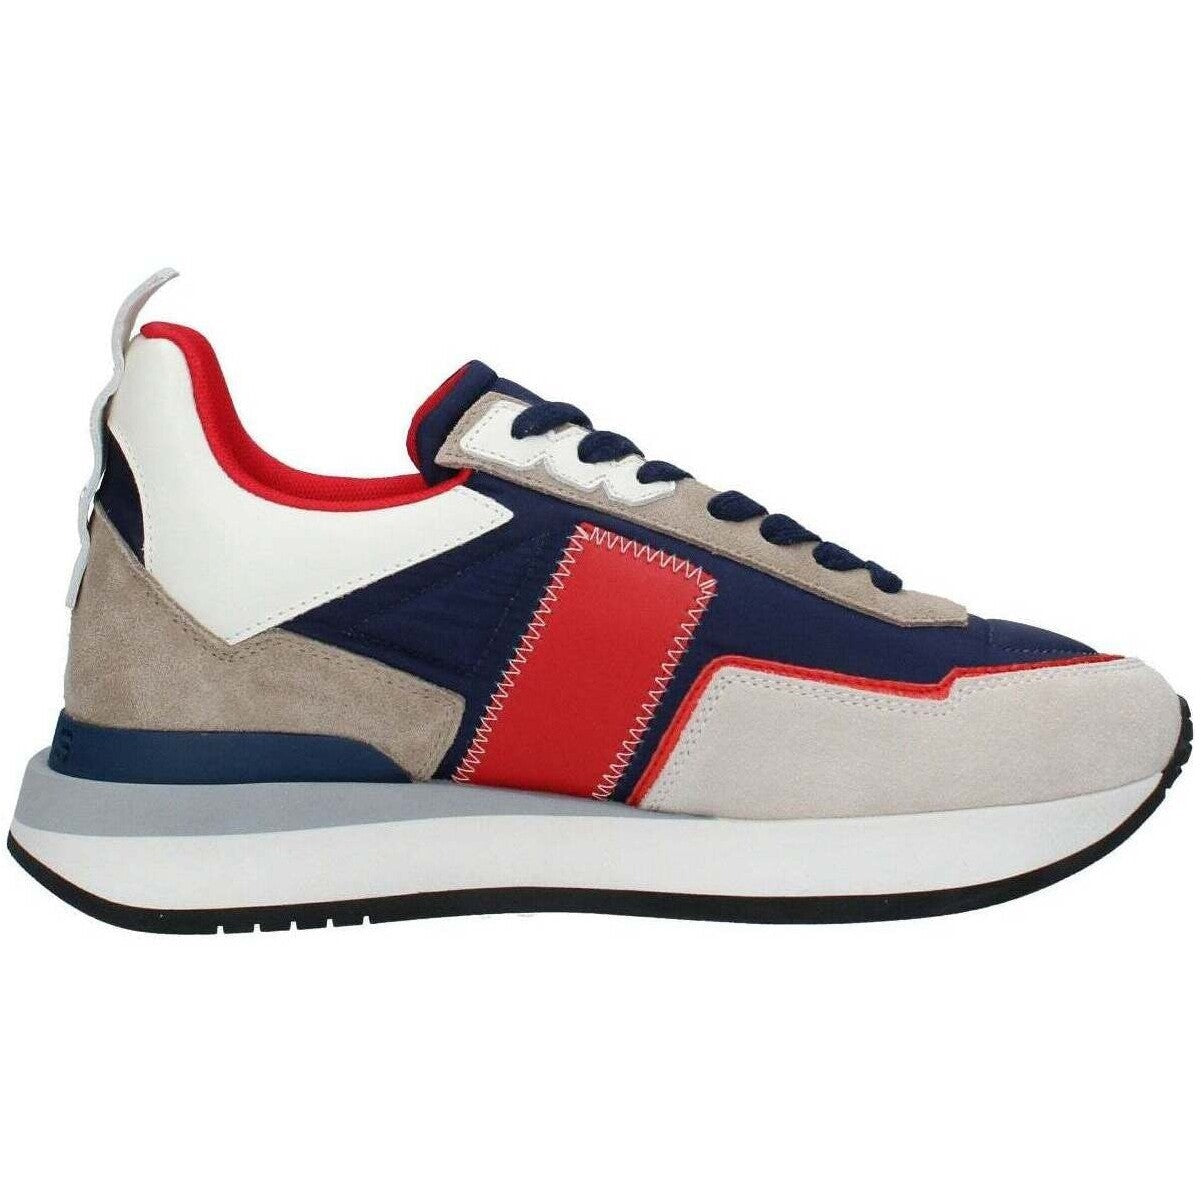 Sneakers Cesare Paciotti 4us man blue and red leather